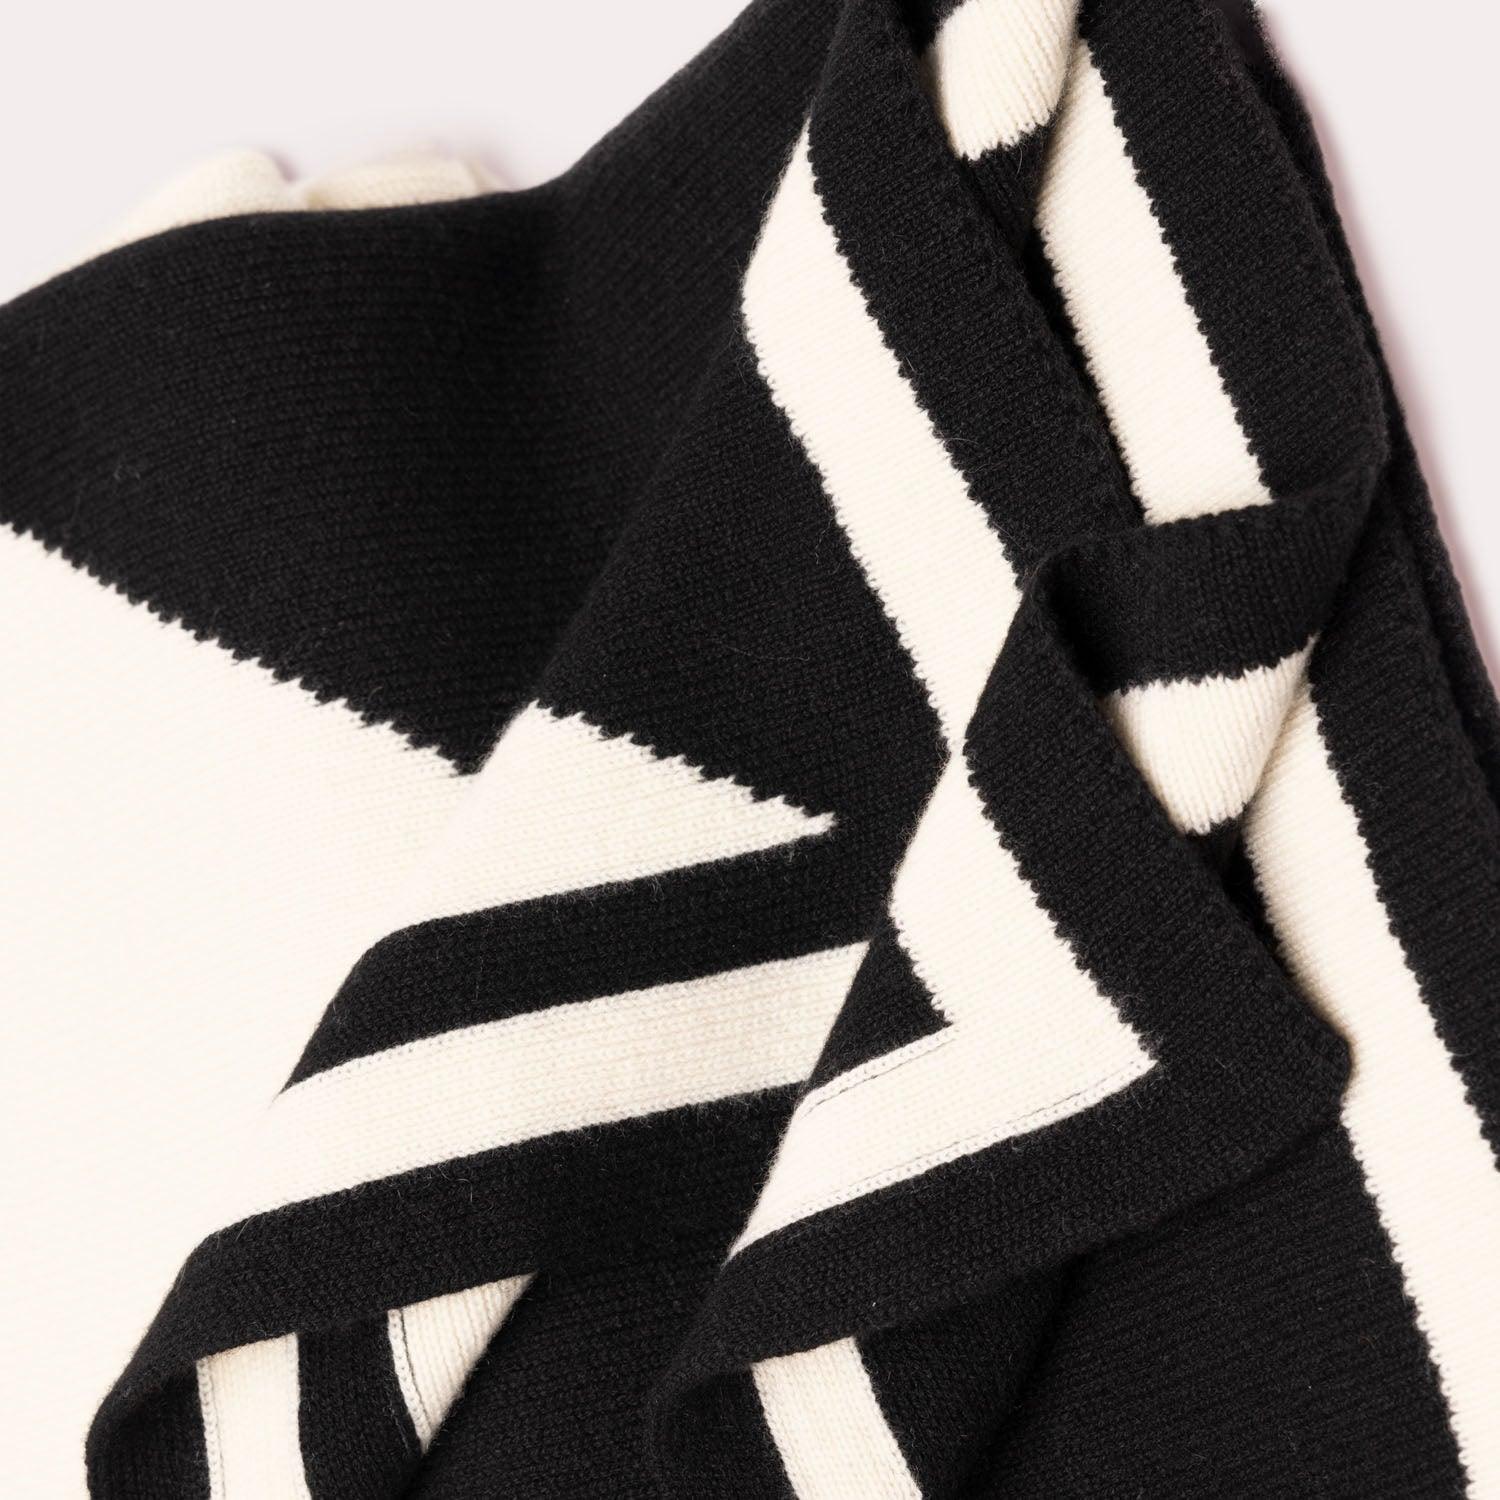 Black and white cashmere blanket by Seymoure Luxury Group.